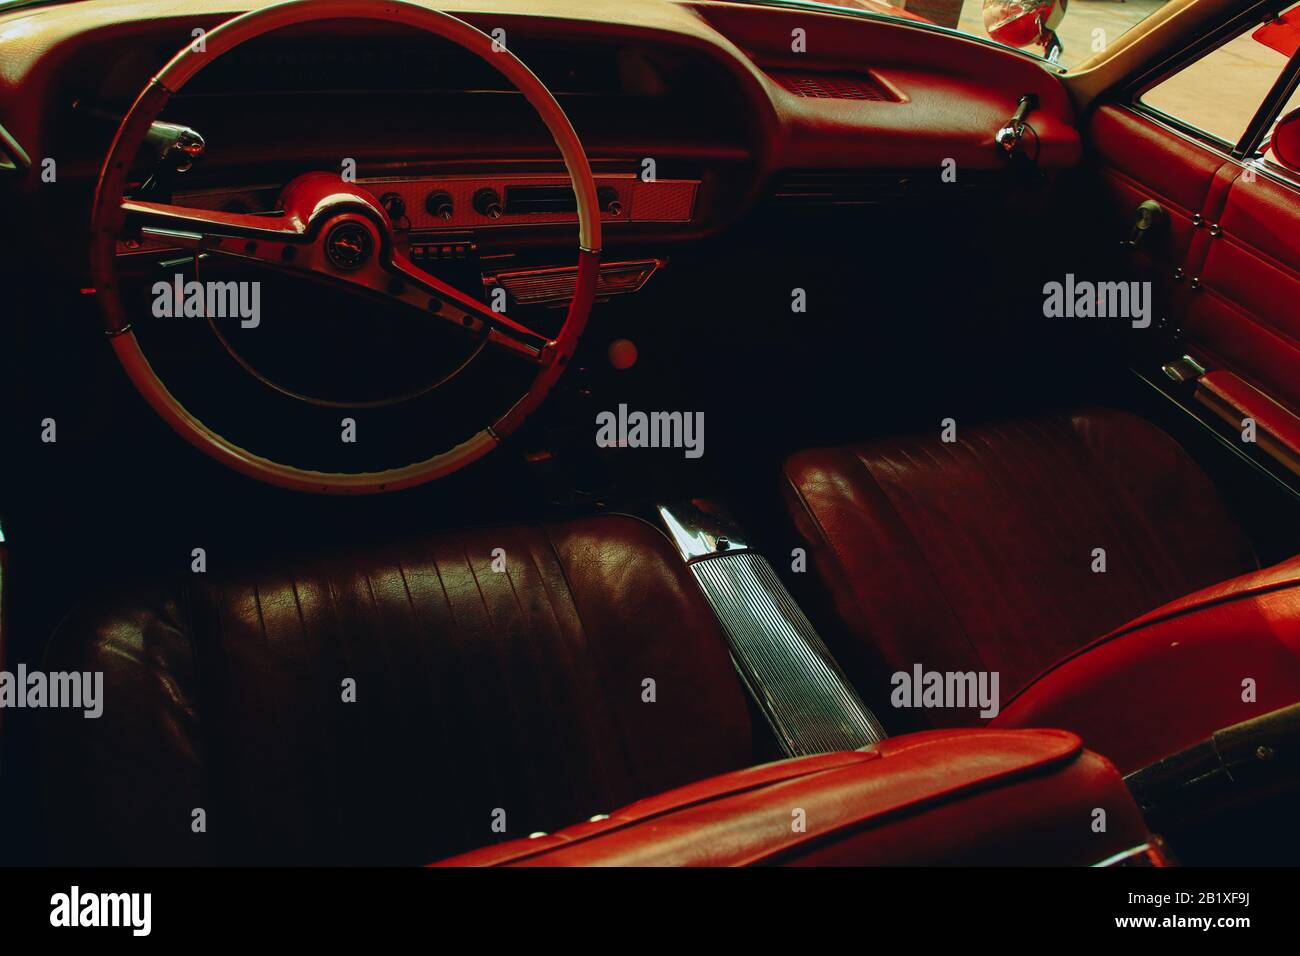 Vintage car interior to show a 1920's cinematic moody themed background Stock Photo